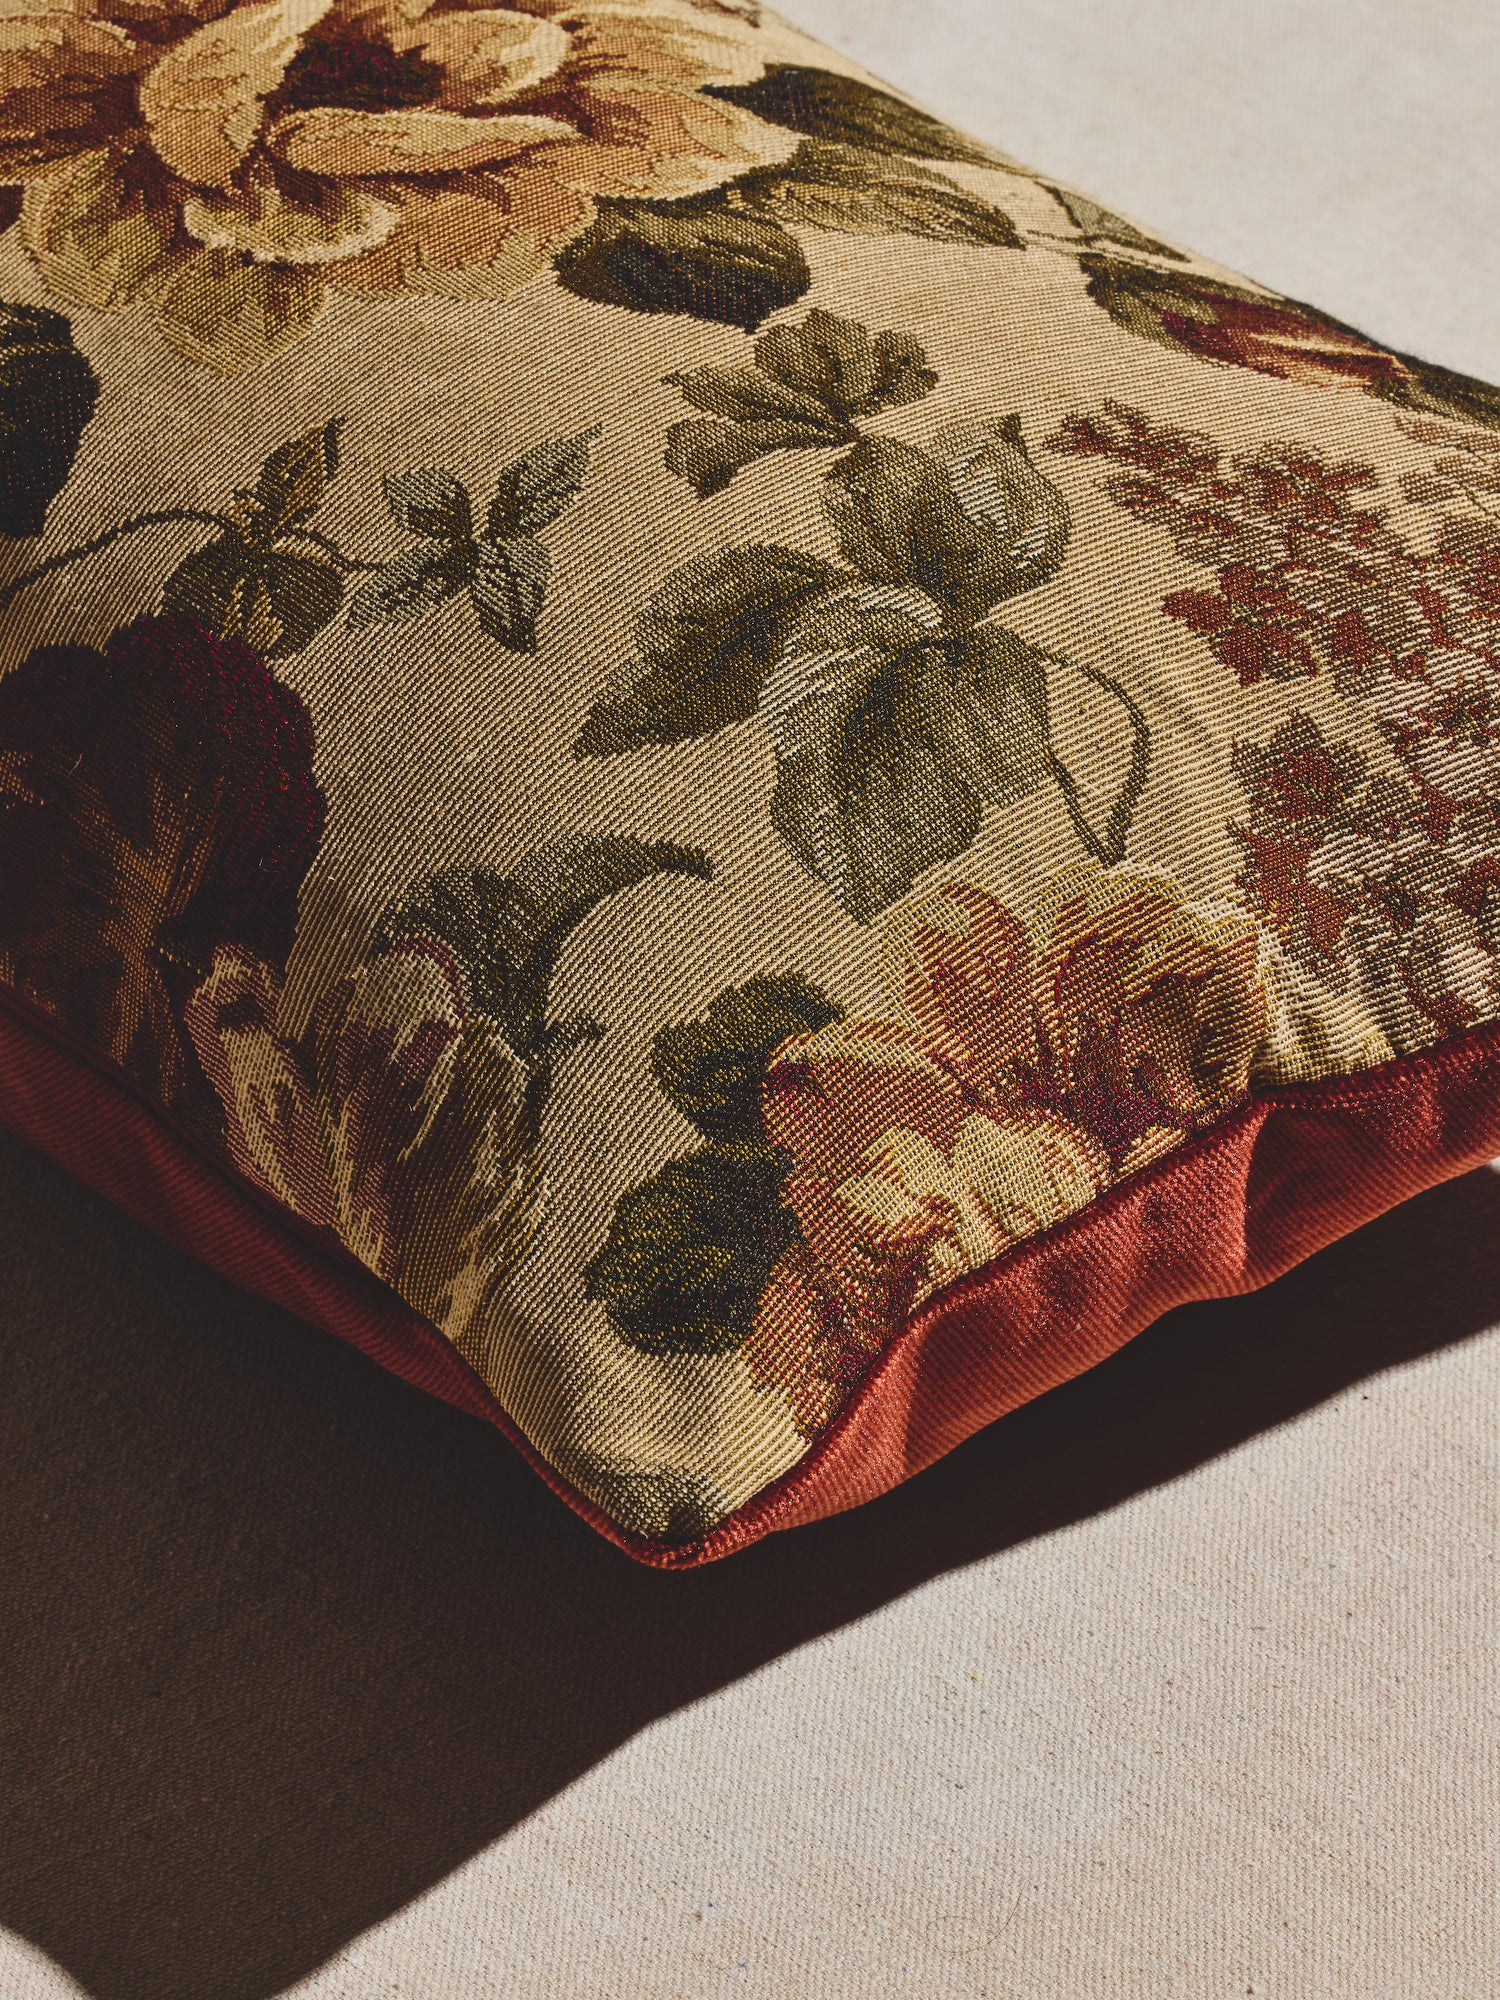 Vintage amber floral pillow with woven floral pattern in warm creams, greens, and amber tones and velvet backing in a deep rust hue. 